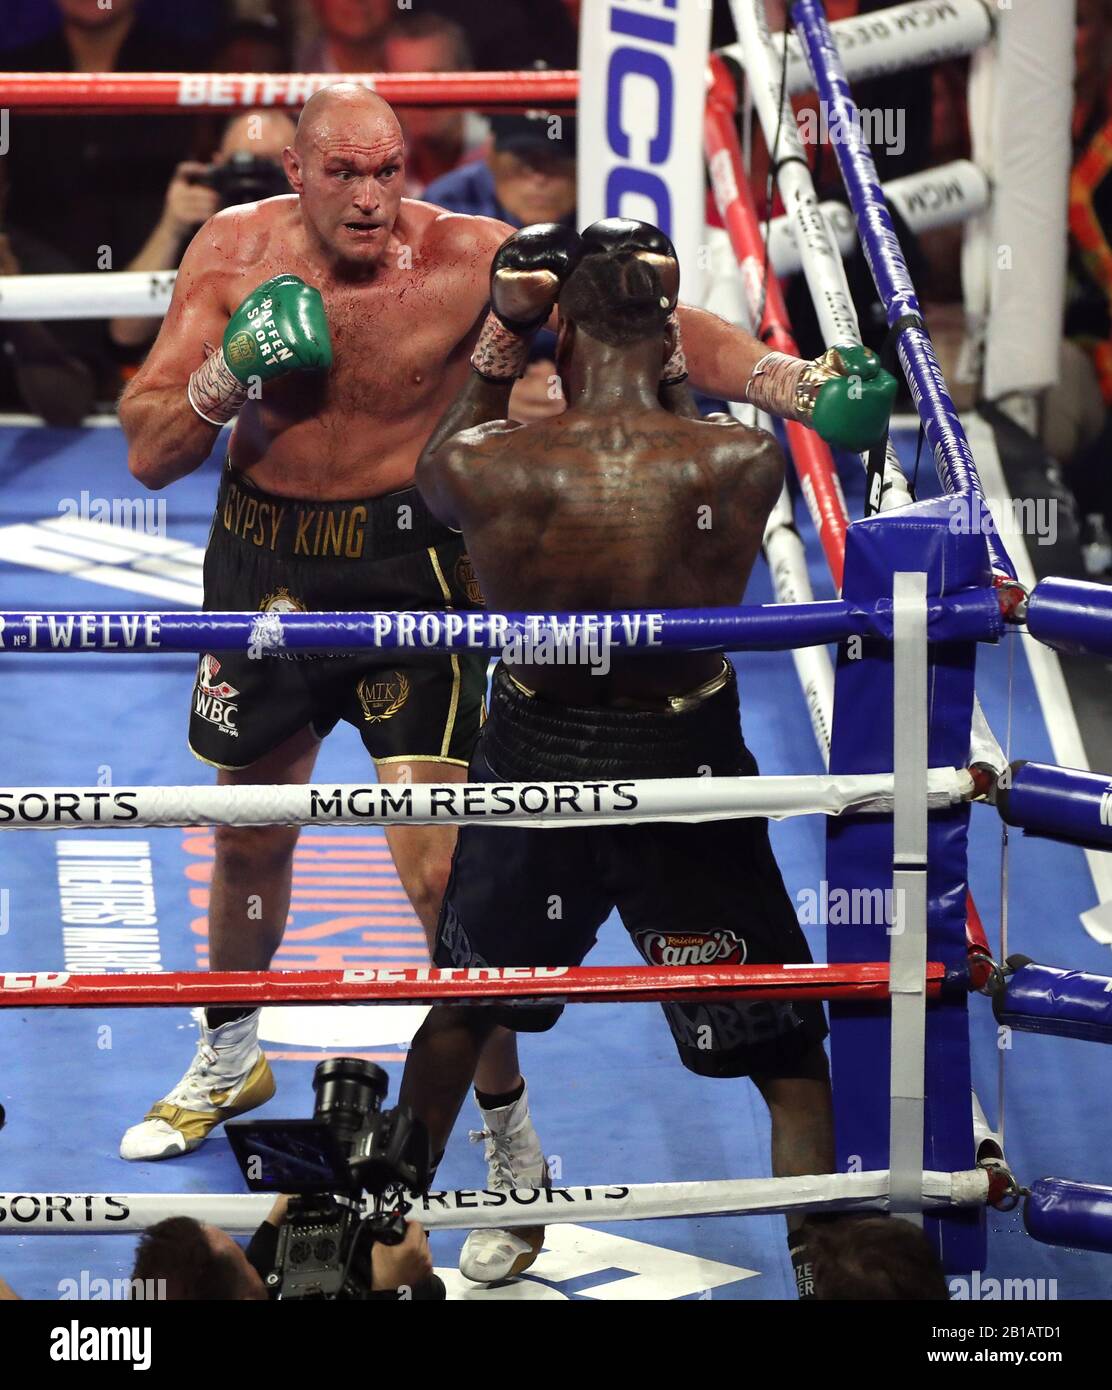 Tyson Fury (left) and Deontay Wilder during the World Boxing Council World Heavy Title bout at the MGM Grand, Las Vegas Stock Photo